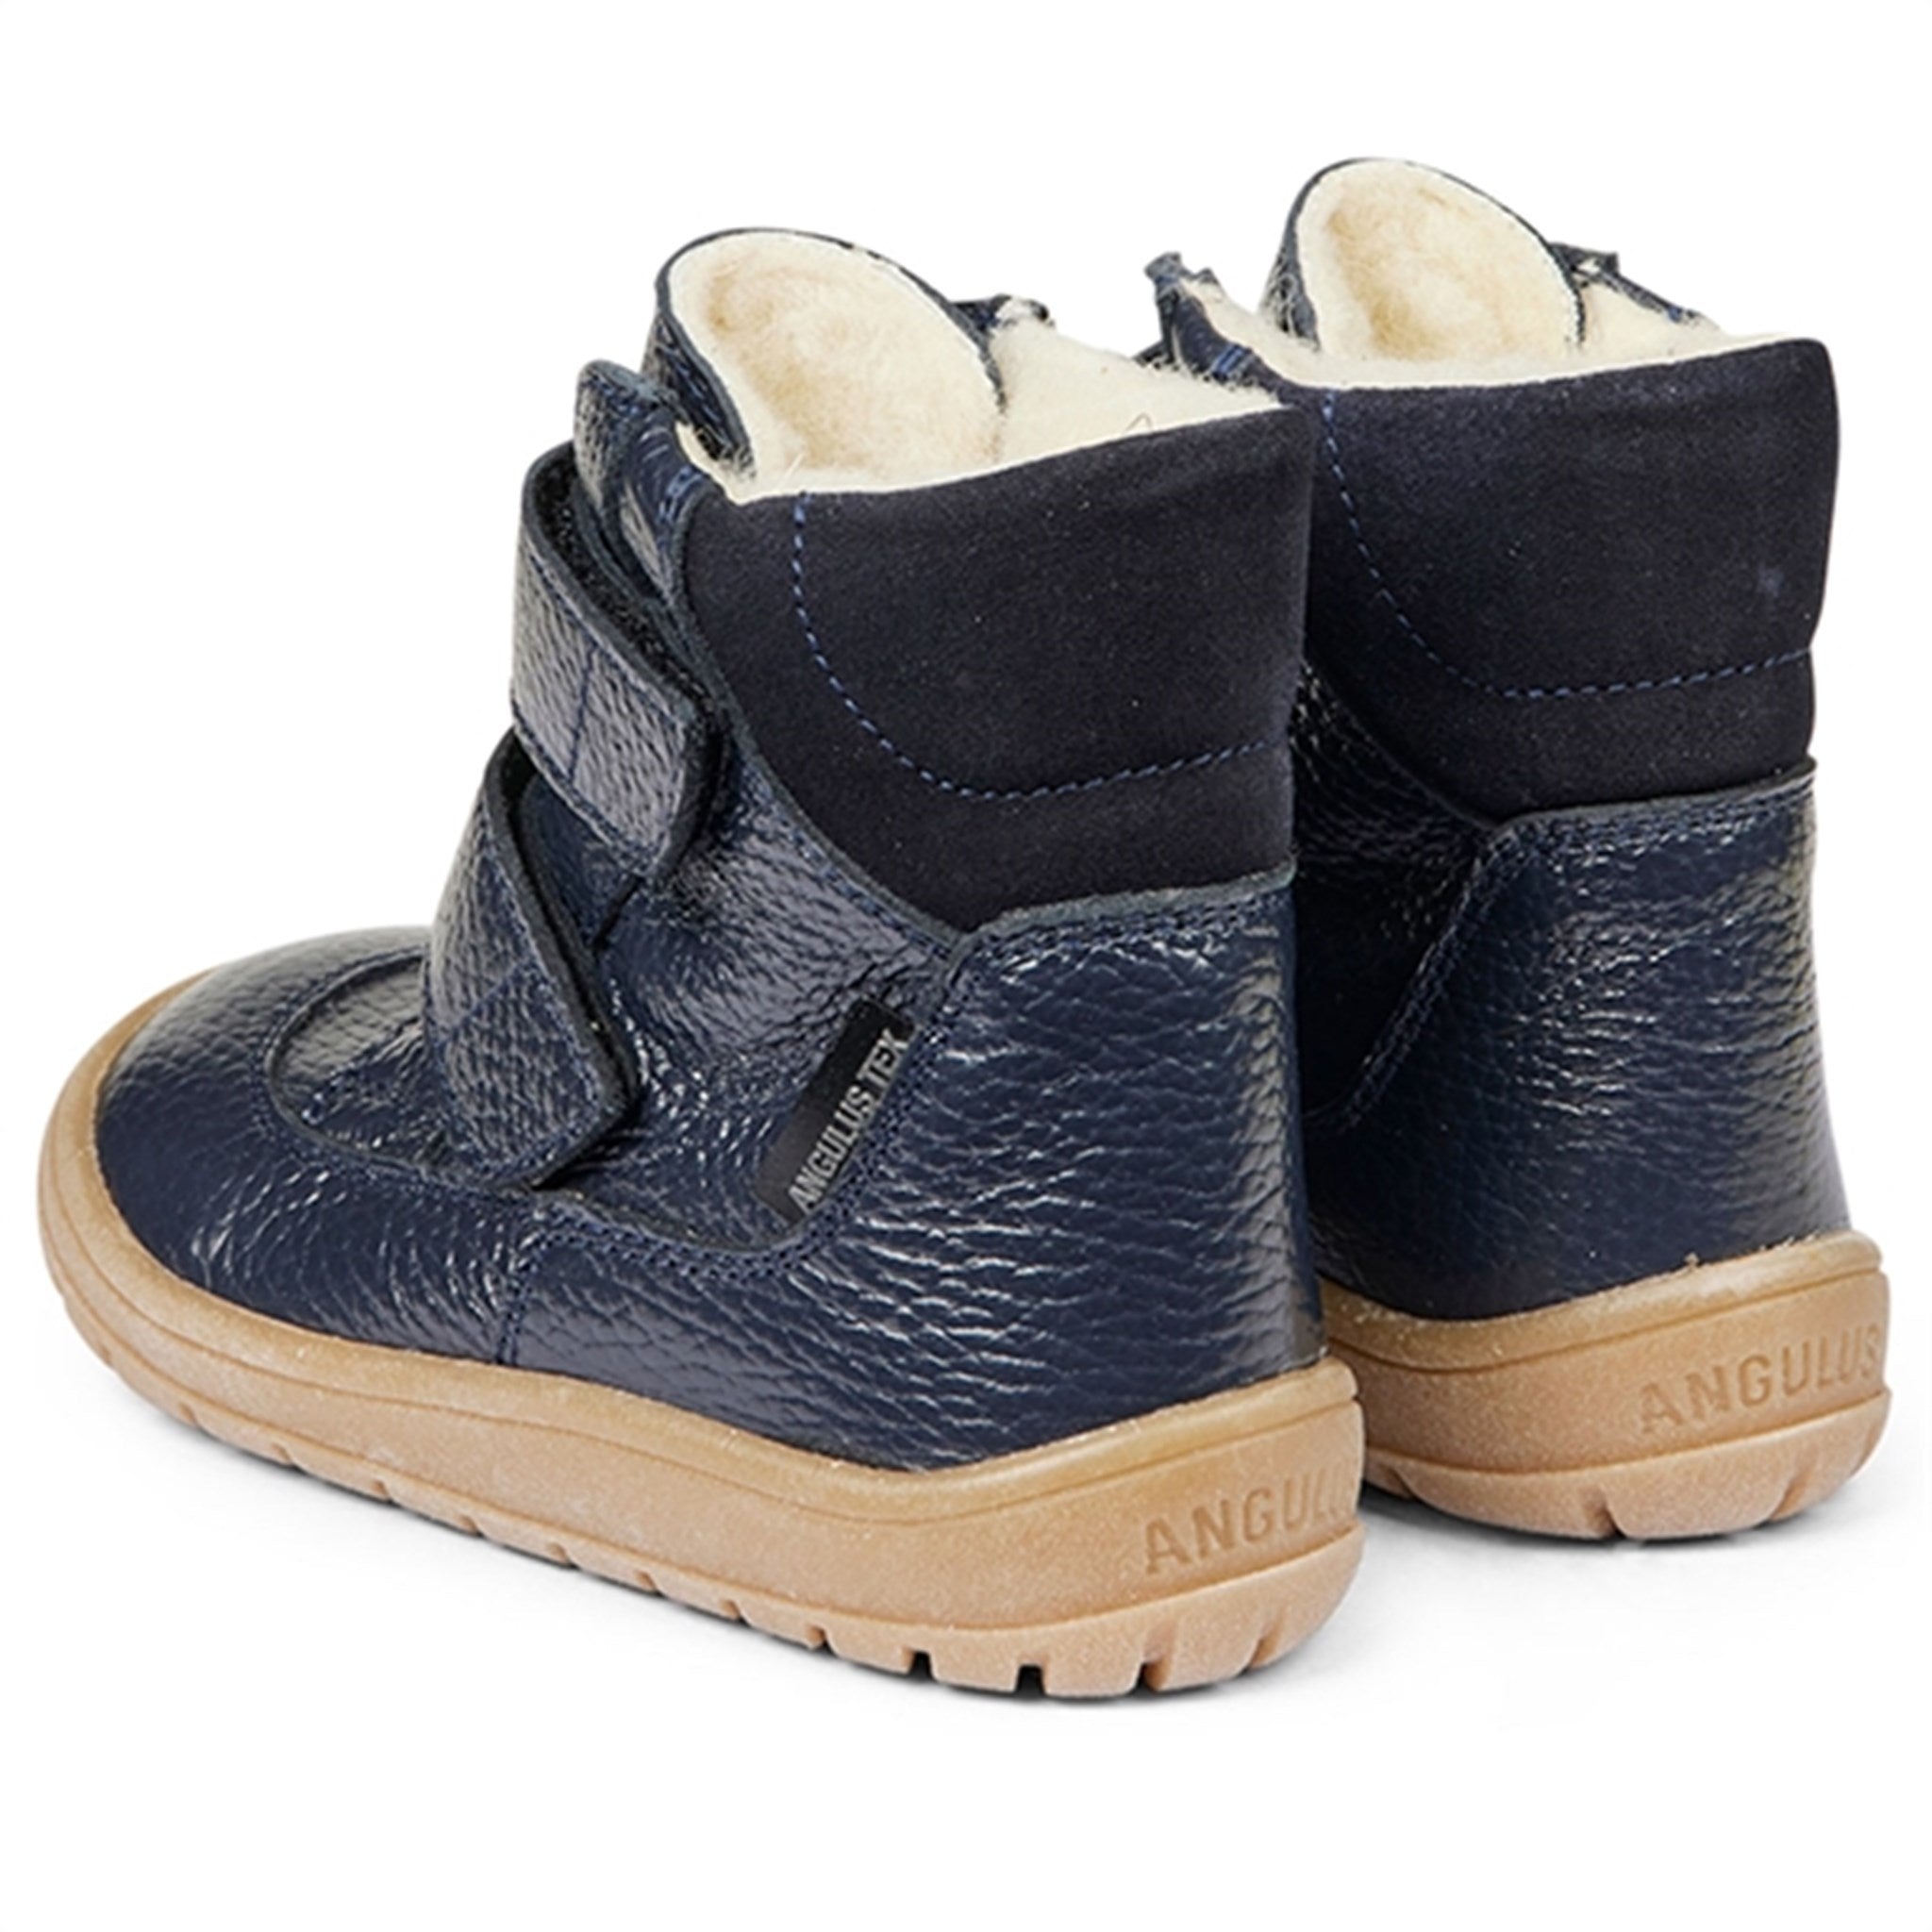 Angulus Tex-Boots With Velcro Navy/Navy 3